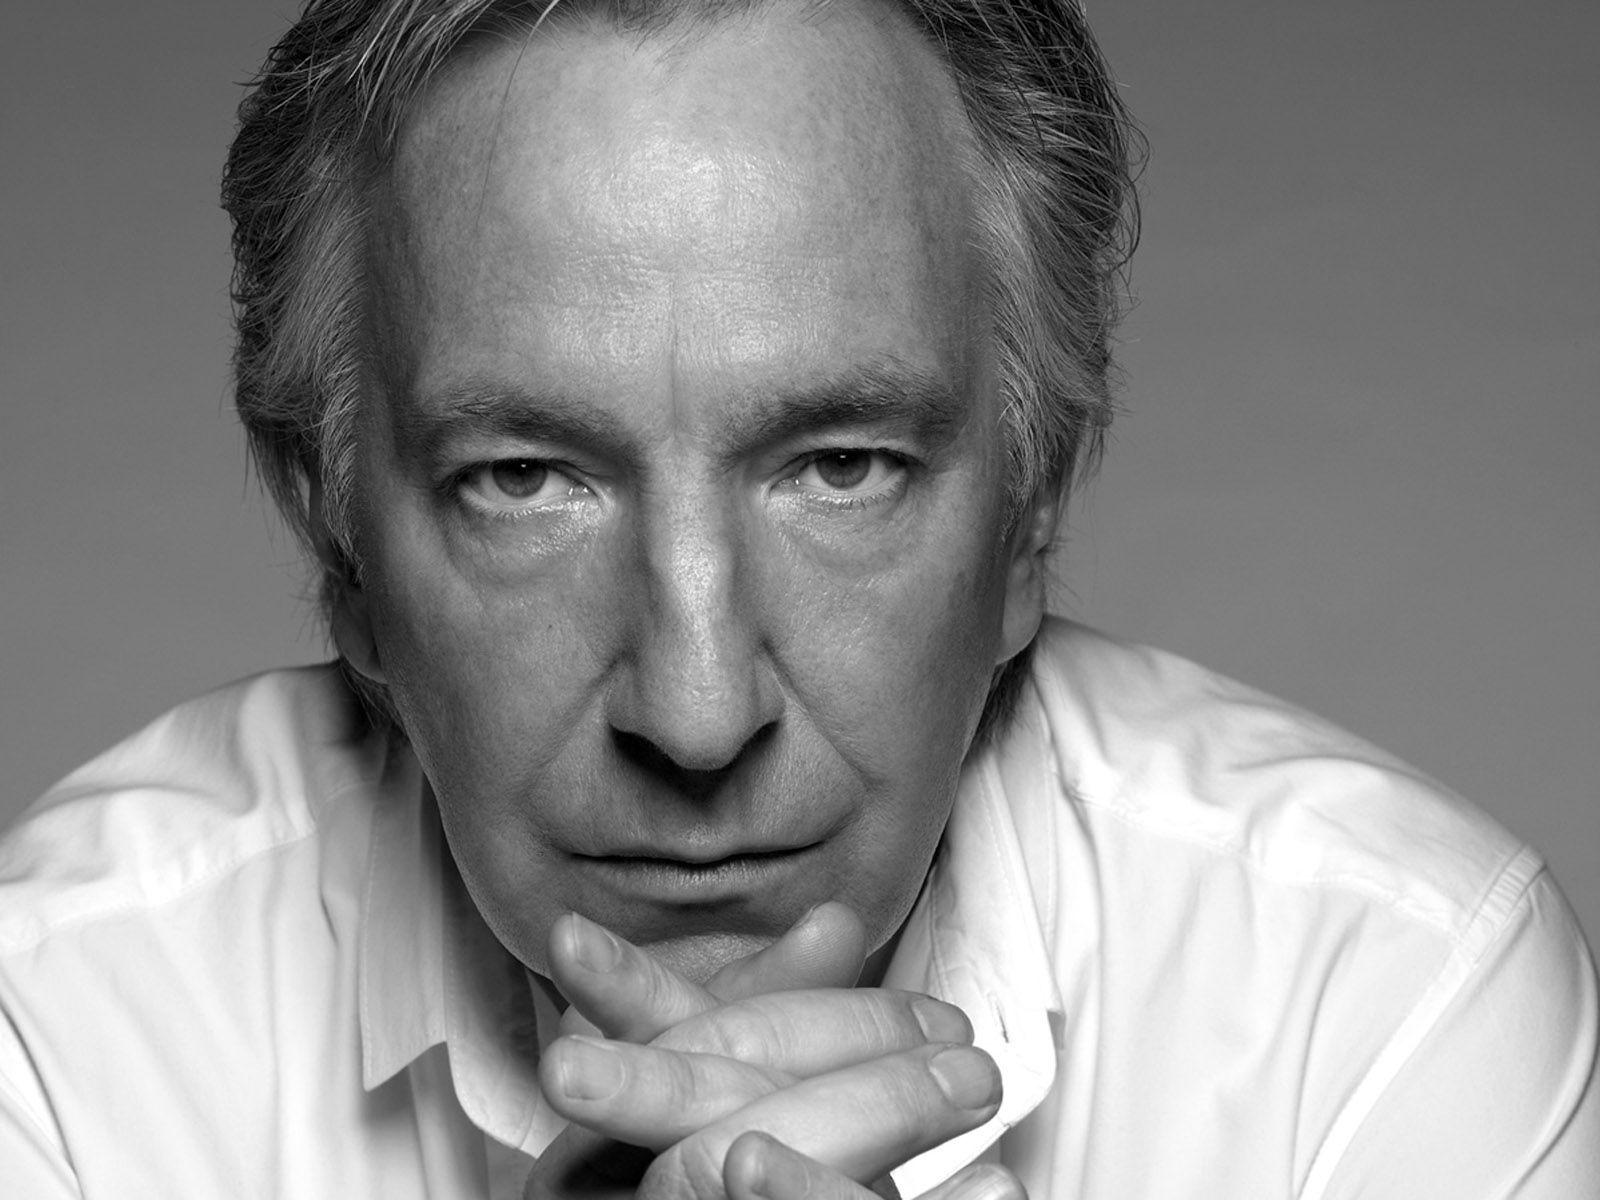 Quotes By Alan Rickman That'll Make You Laugh, Learn And Cry At